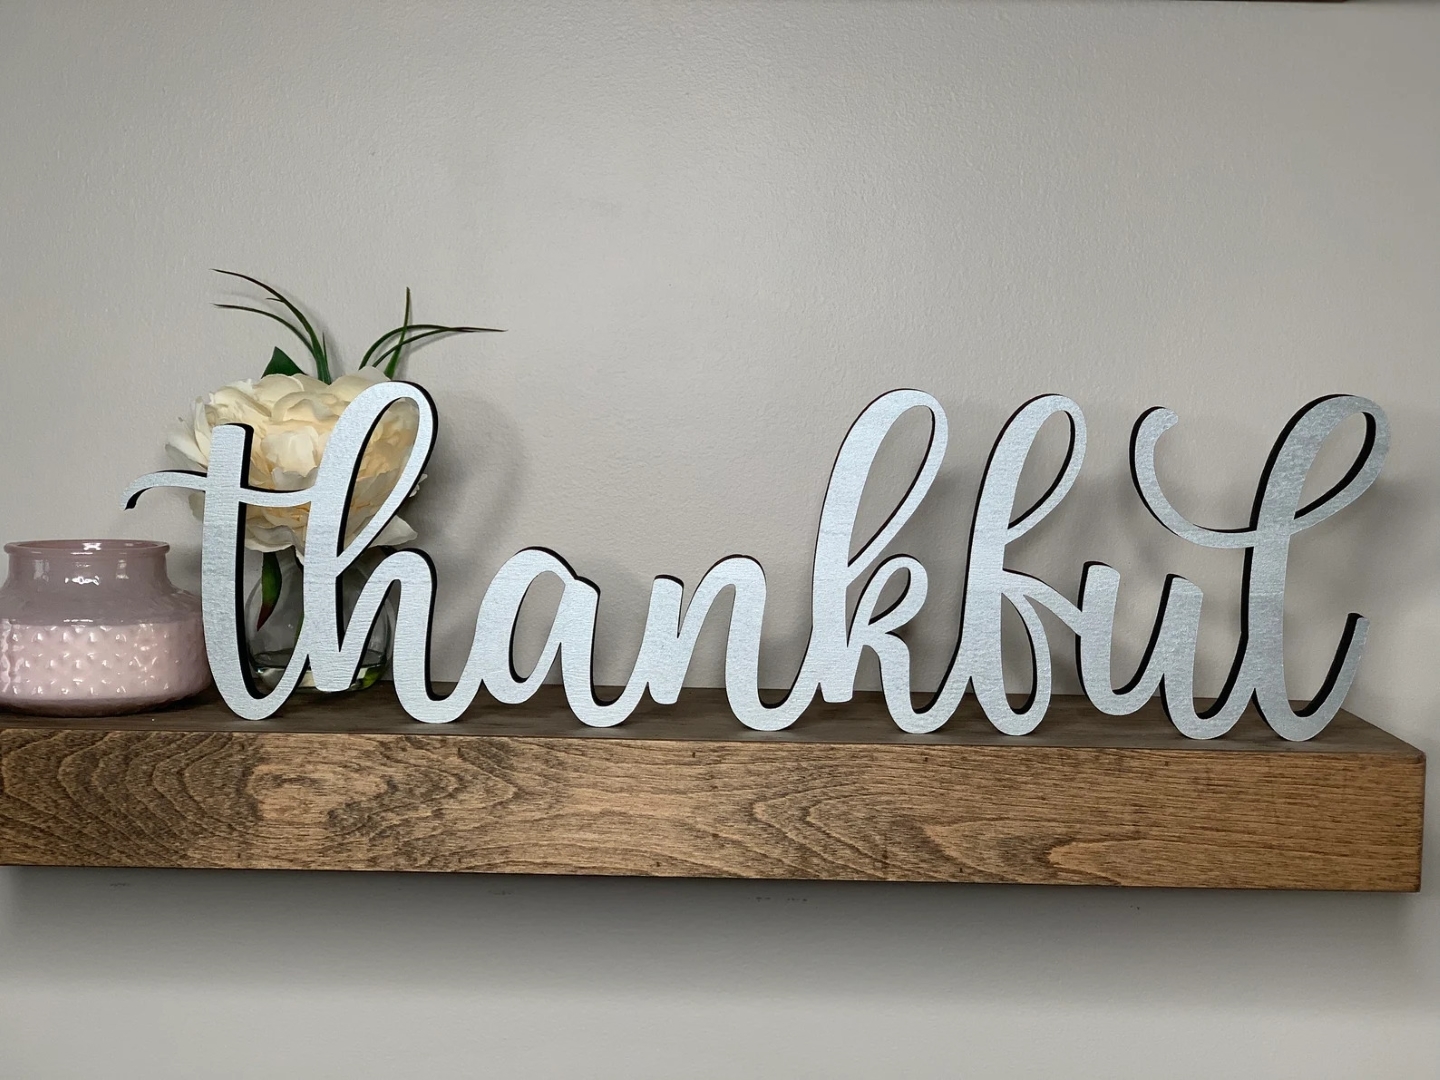 16 Adorable Thanksgiving Sign Designs For Every Corner Of Your Home